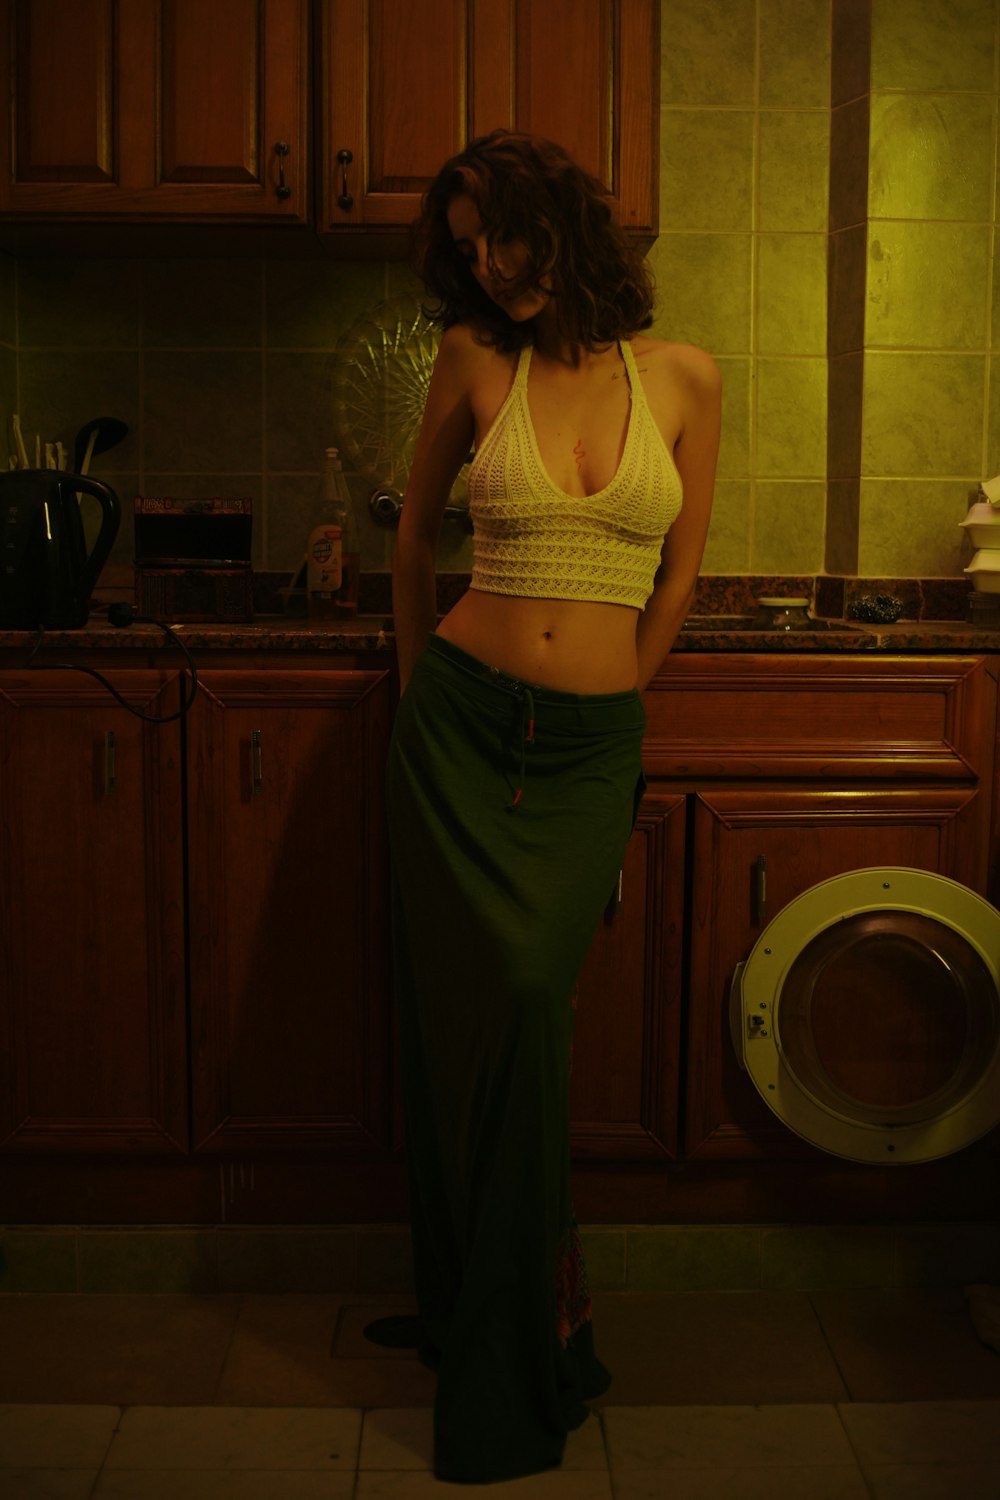 a woman standing in a kitchen next to a washer